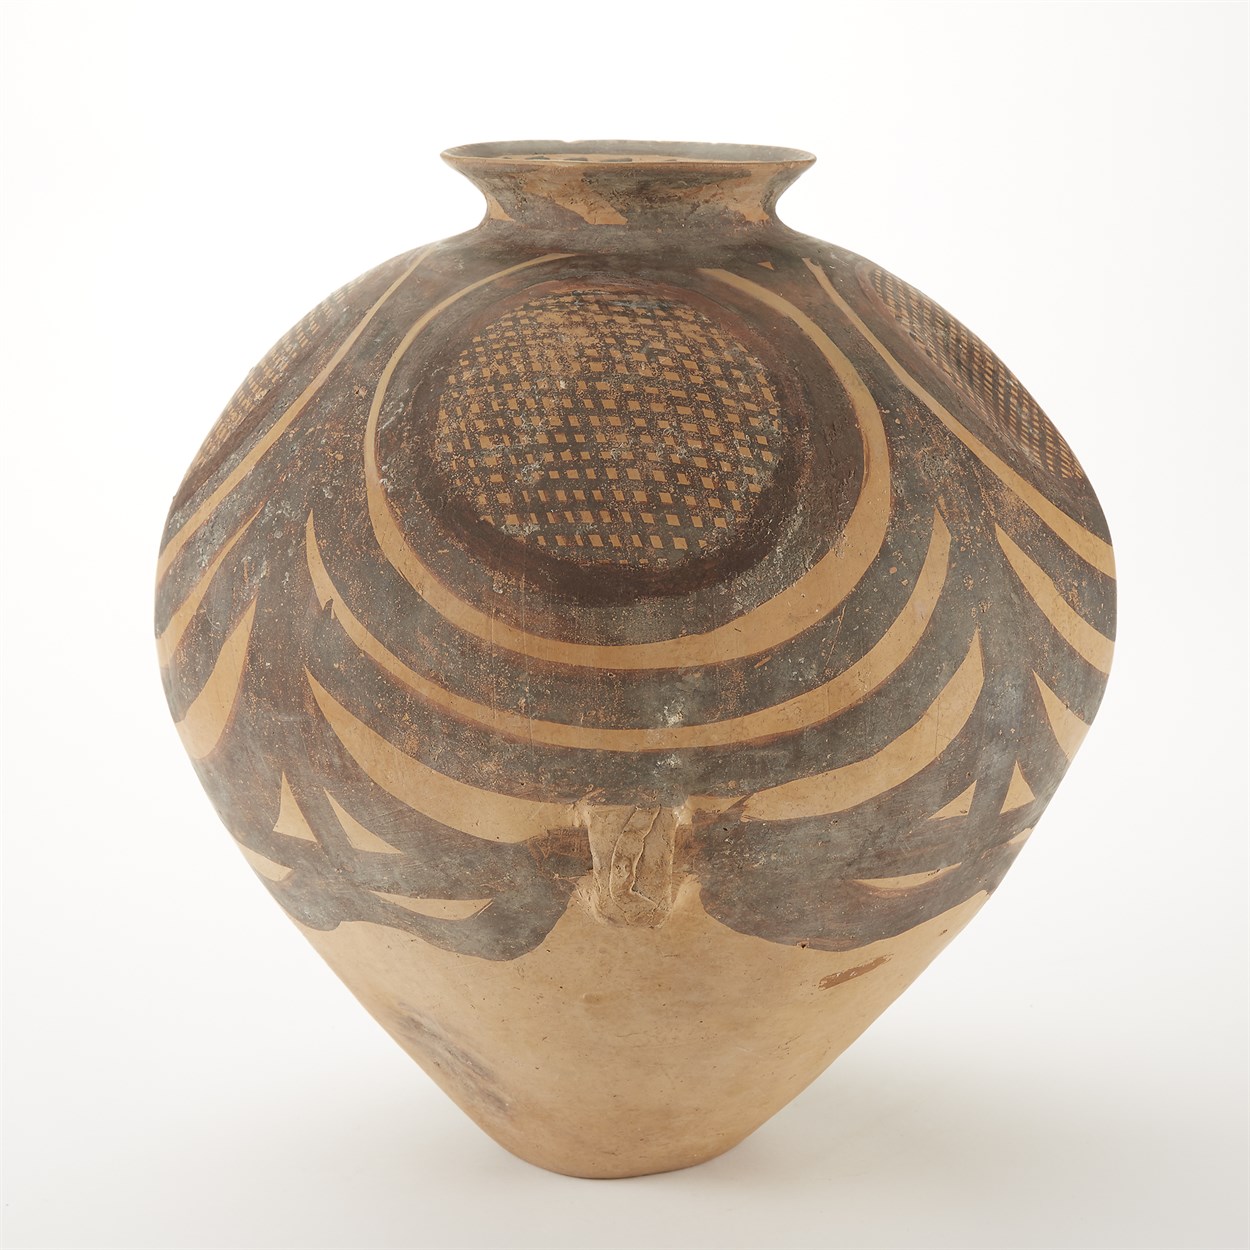 Lot 1 - A Chinese Neolithic painted pottery jar, Banshan culture